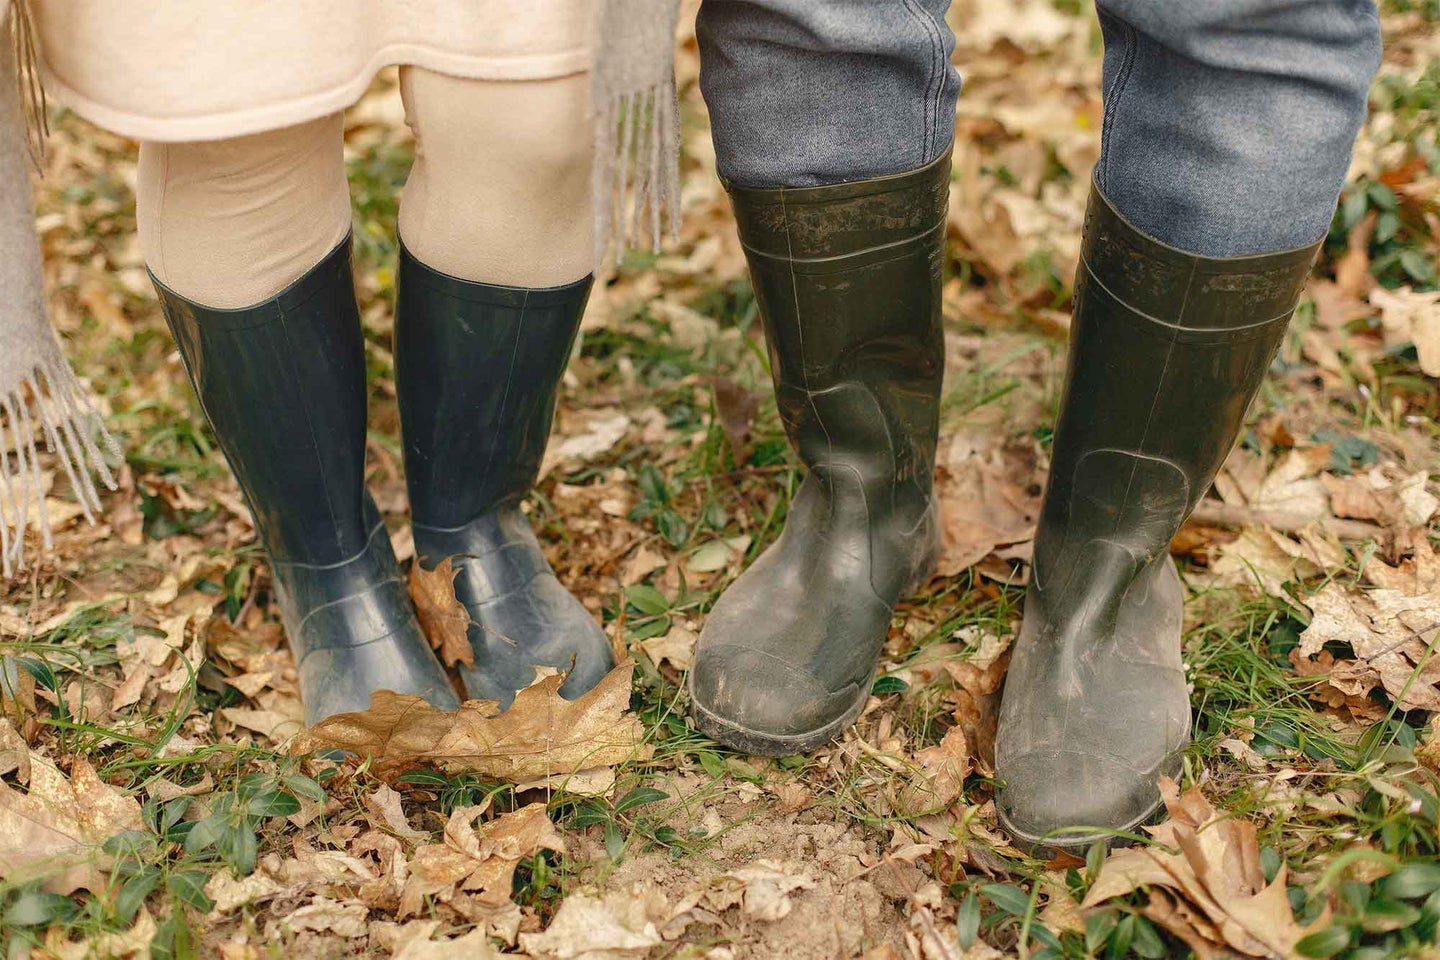 Two people wearing rubber boots